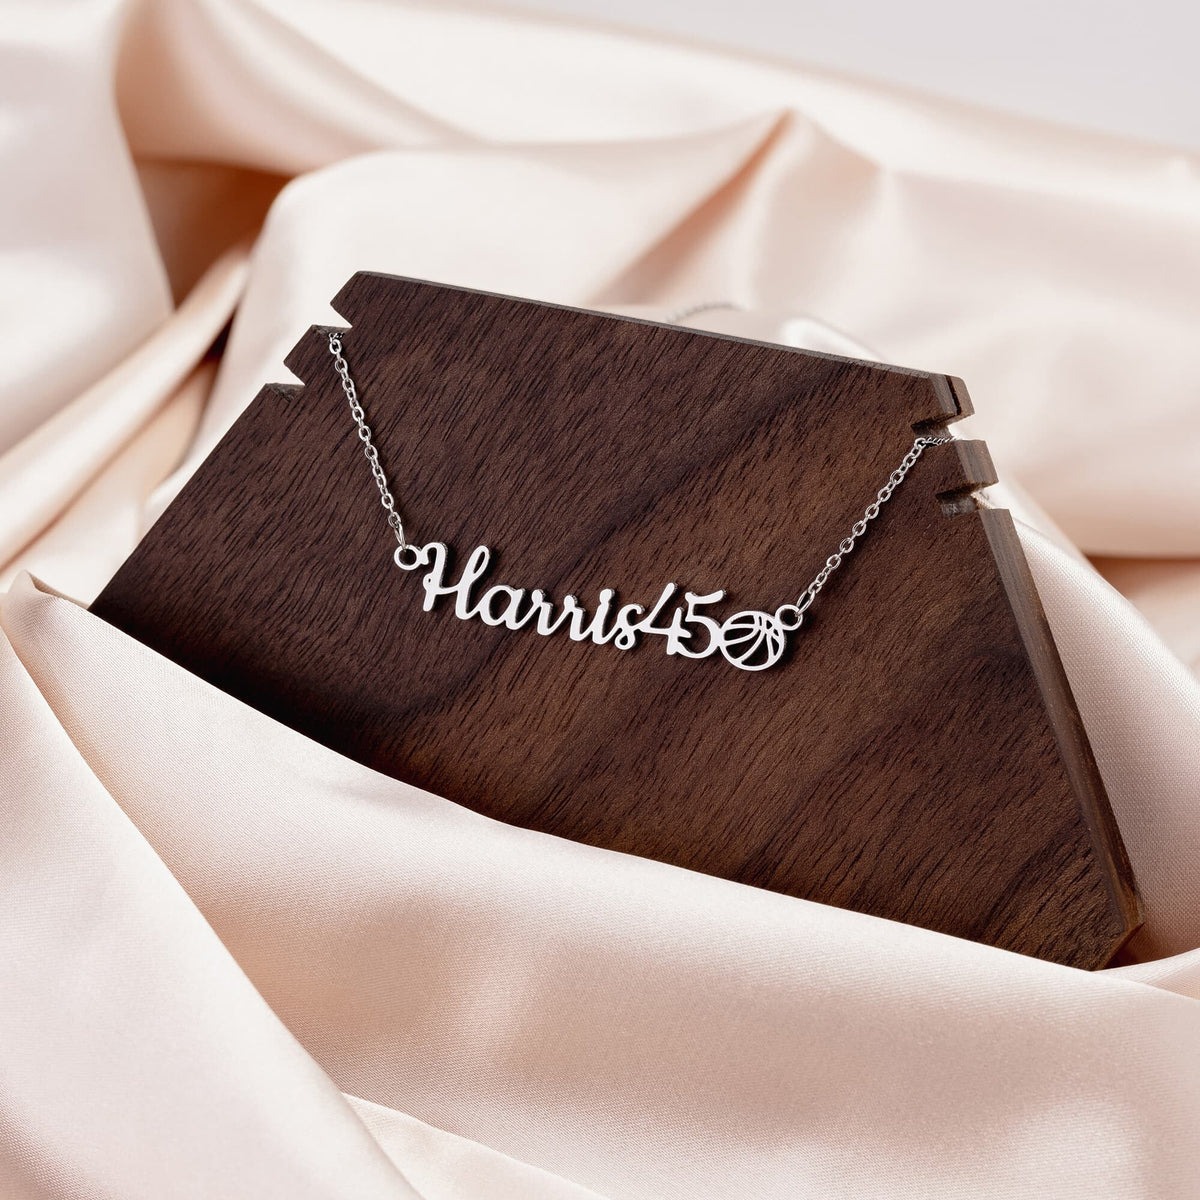 Your Name And Favorite Sport On This Ceautiful Chained Necklace